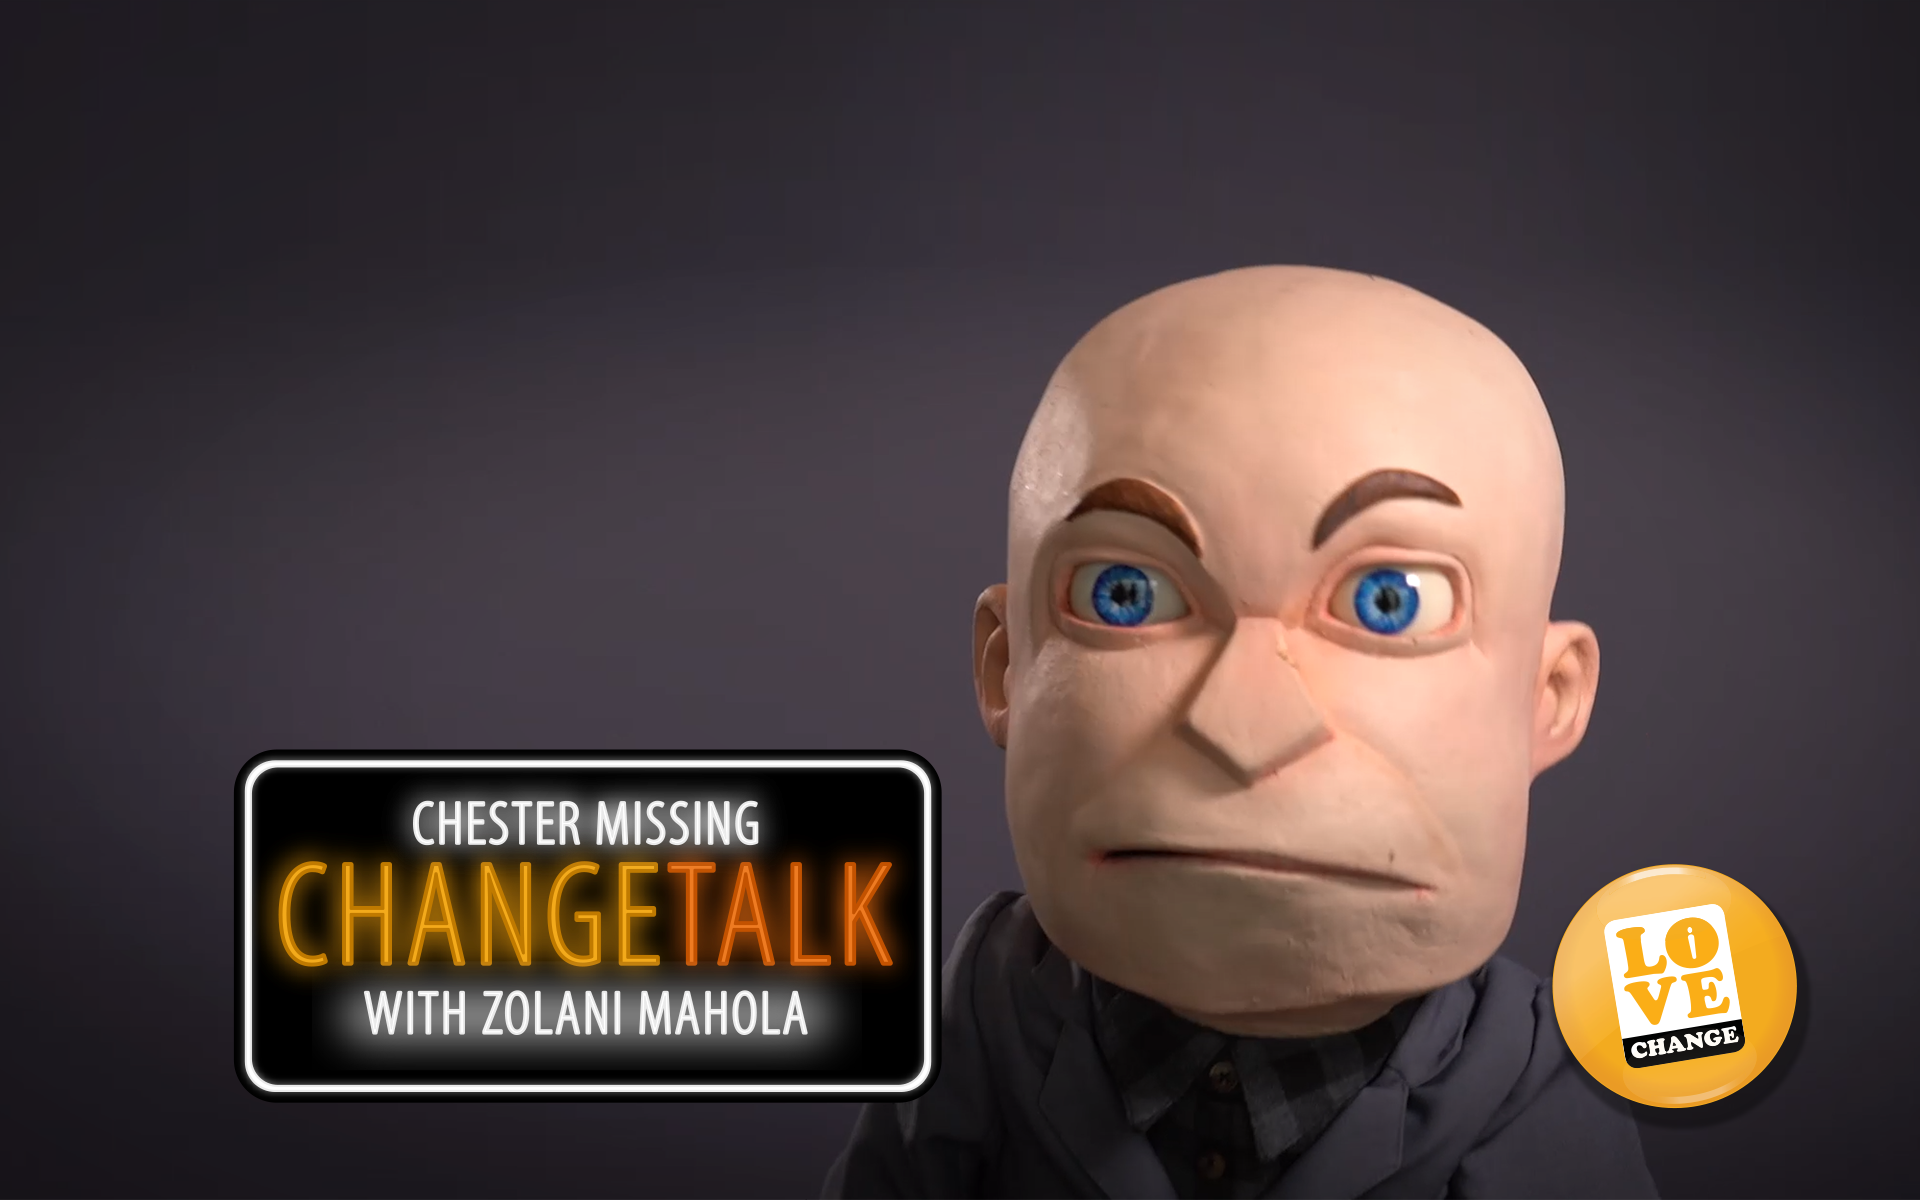 Change Talk - Chester Missing with Zolani Mahola